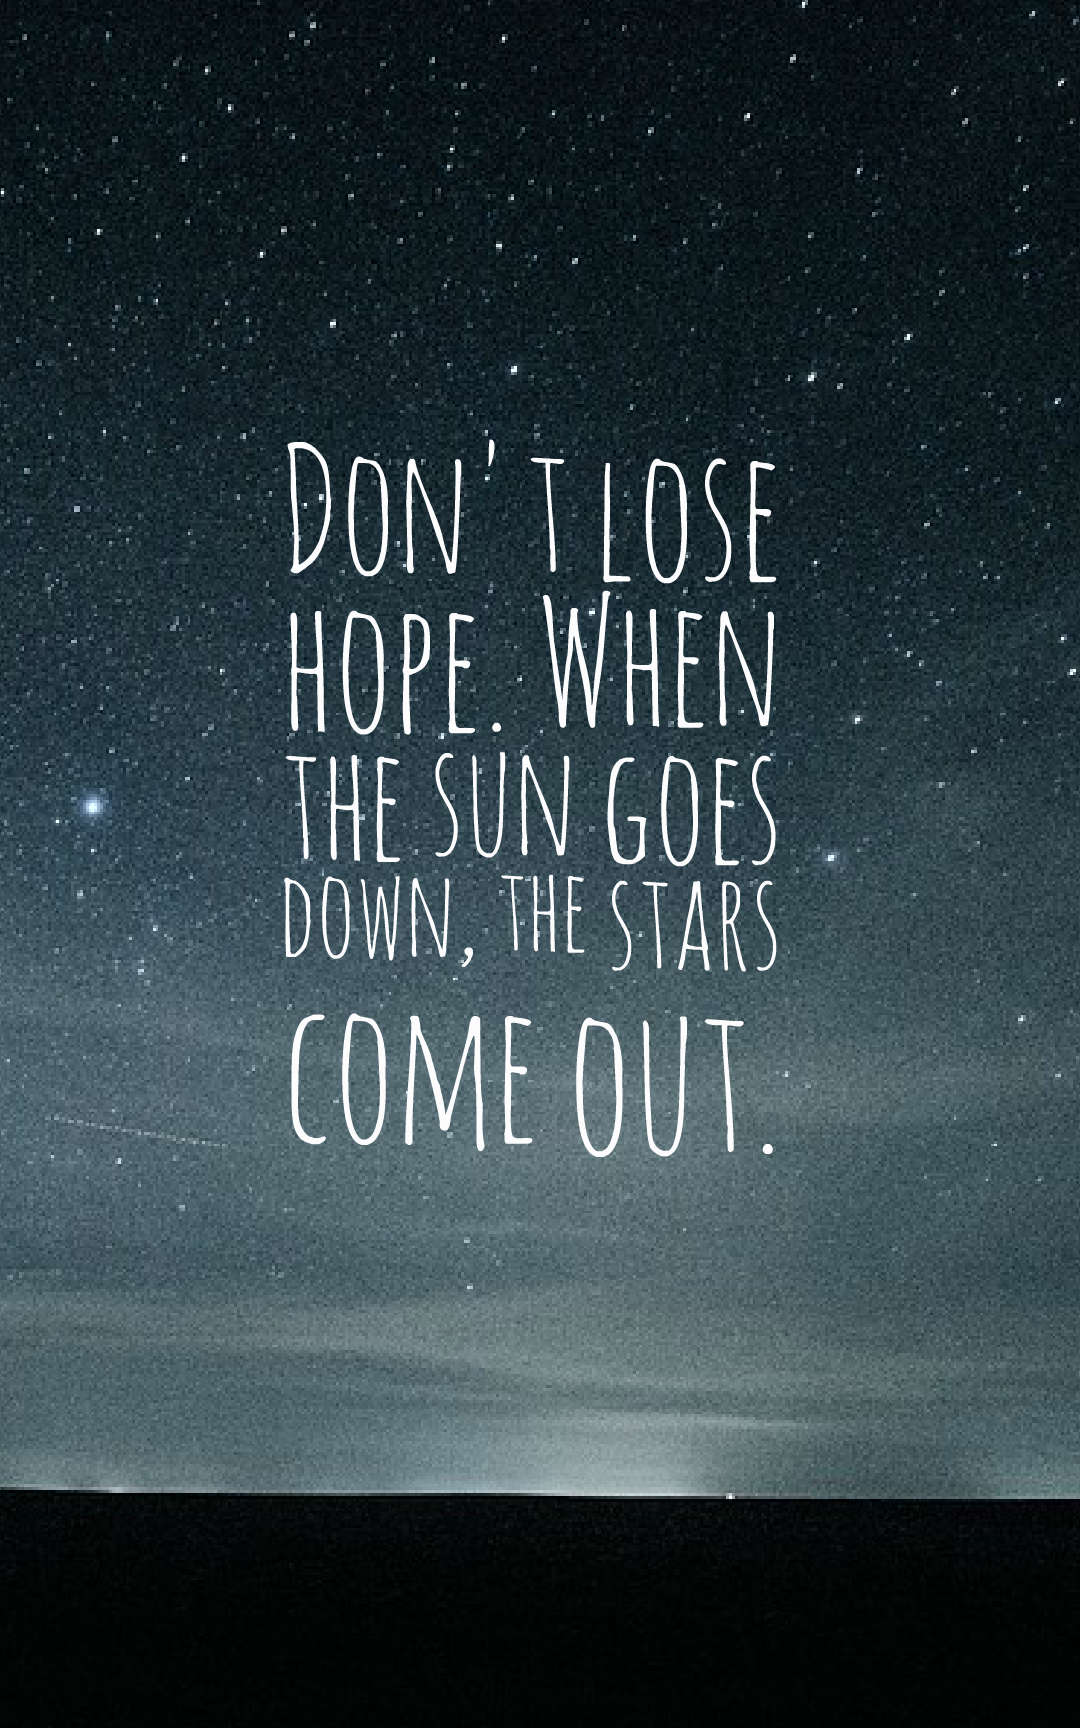 Don’t lose hope when the sun goes down, the stars come out